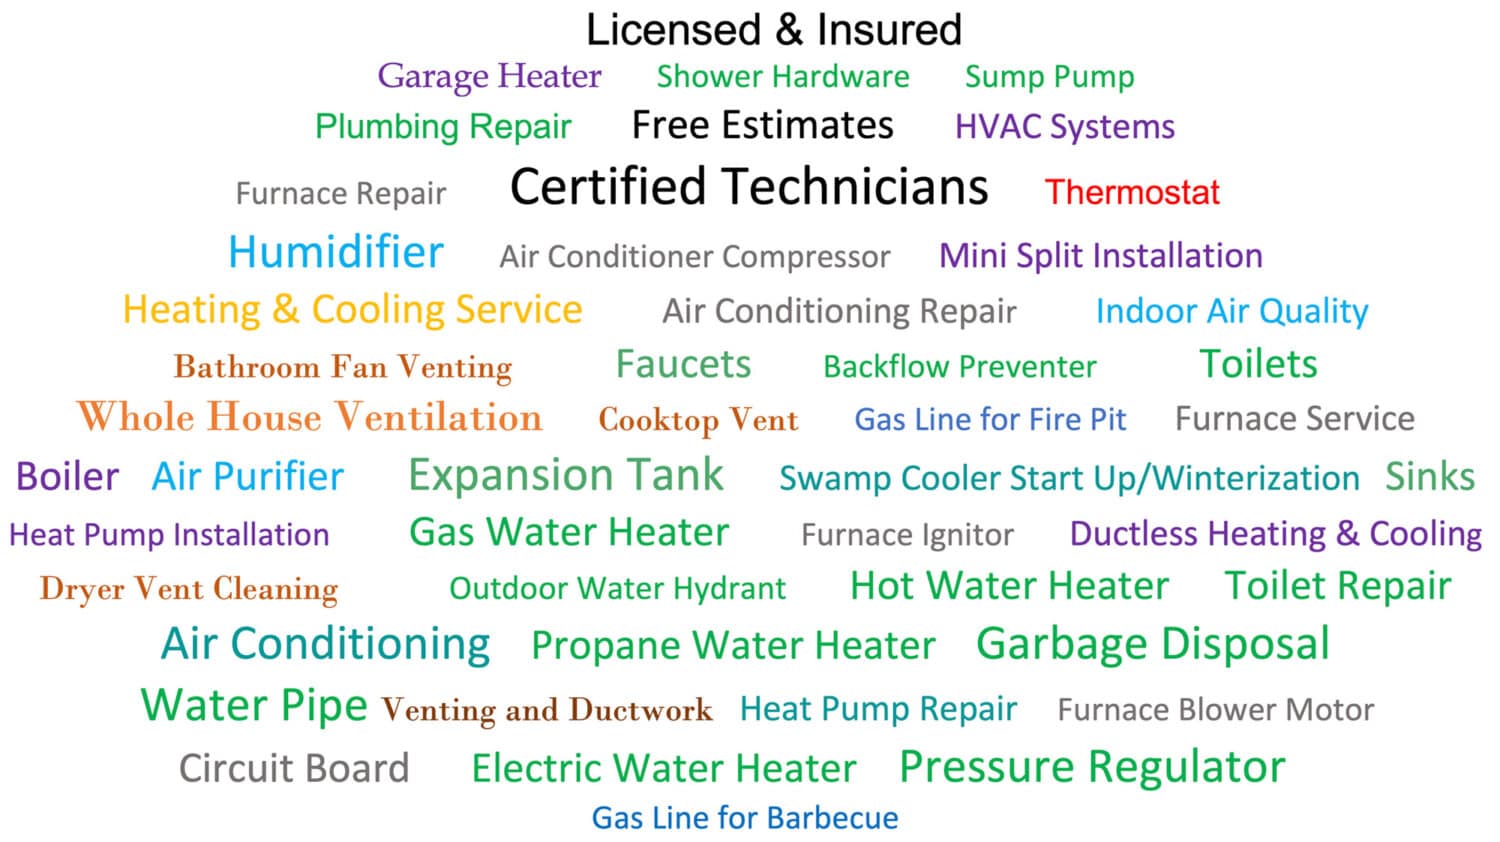 List of HVAC and plumbing services provided by Oak View Mechanical: Garage heater, shower hardware, sump pump, plumbing repair, hvac systems, furnace repair, thermostat, humidifier, air conditioner compressor, mini split installation, heating and cooling service, air conditioning repair, indoor air quality, bathroom fan venting, cook top vent, gas line for fire pit, furnace service, boiler, air purifier, expansion tank, swamp cooler, sinks, heat pump installation, gas water heater, furnace ignitor, ductless heating and cooling, dryer vent cleaning, outdoor water hydrant, hot water heater, toiler repair, air conditioning, propane water heater, garbage disposal, water pipe, venting and ductwork, heat pump repair, furnace blower motor, circuit board, electric water heater, pressure, regulator, gas line for barbecue, heating, cooling, venting, air quality.